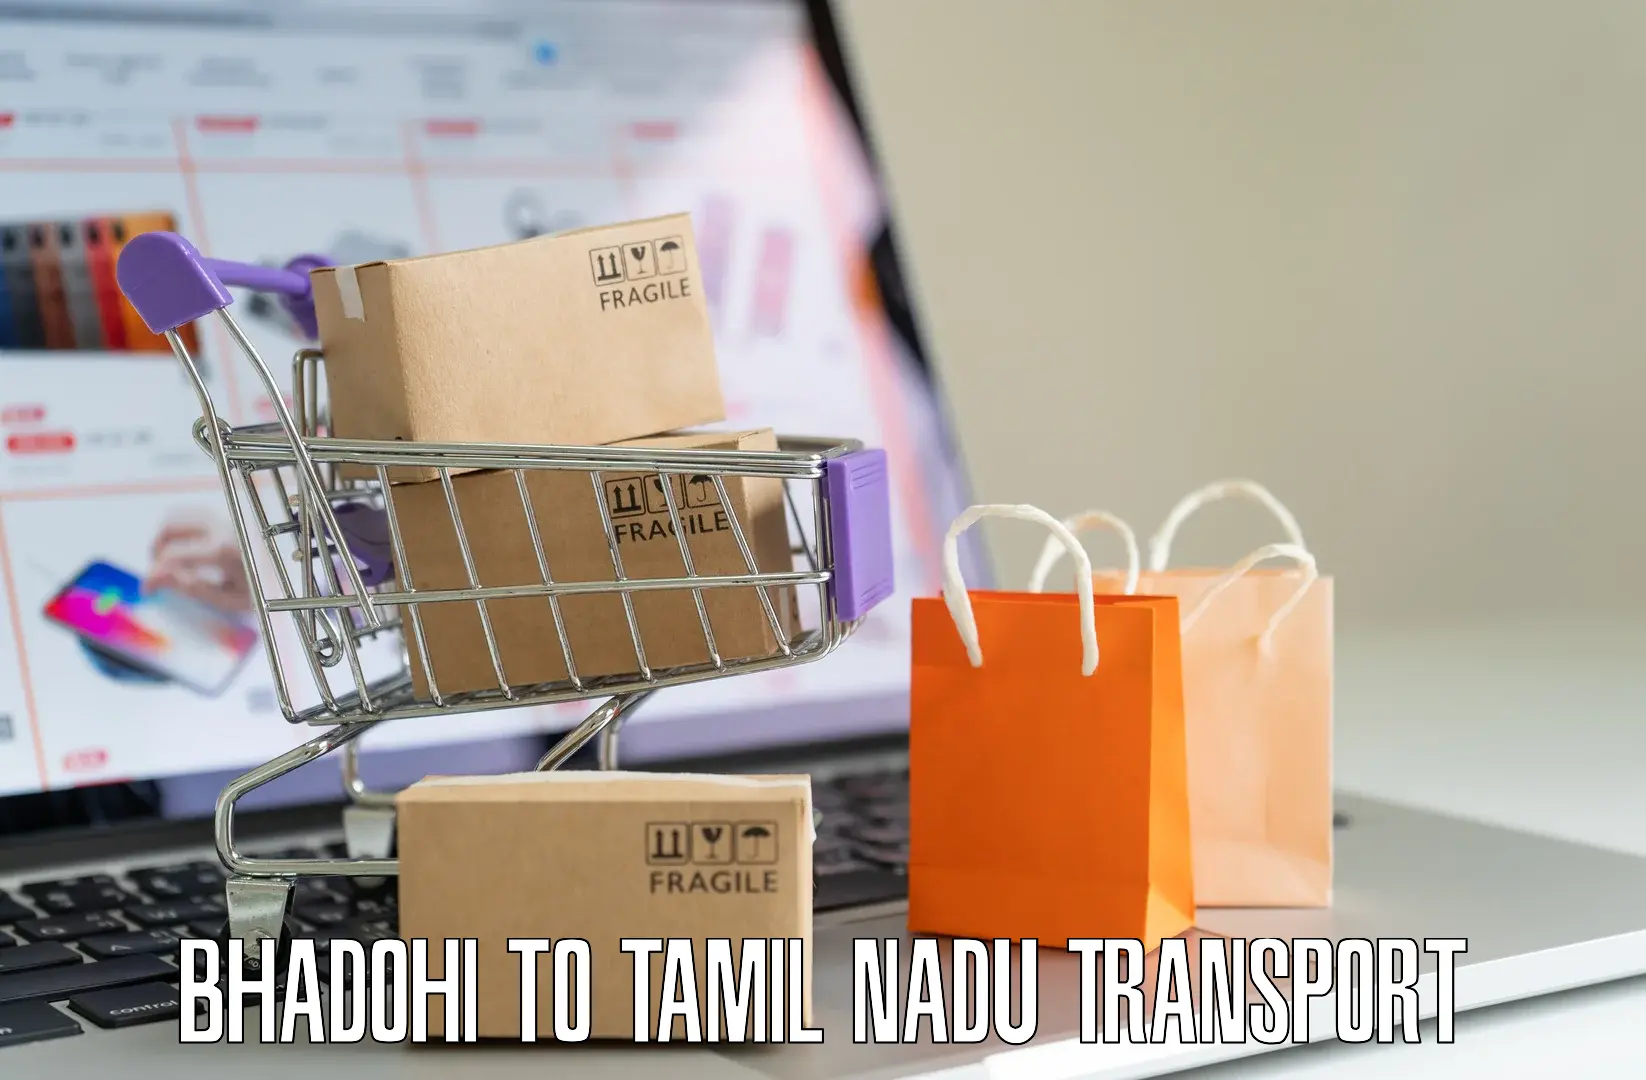 Goods delivery service Bhadohi to Avadi